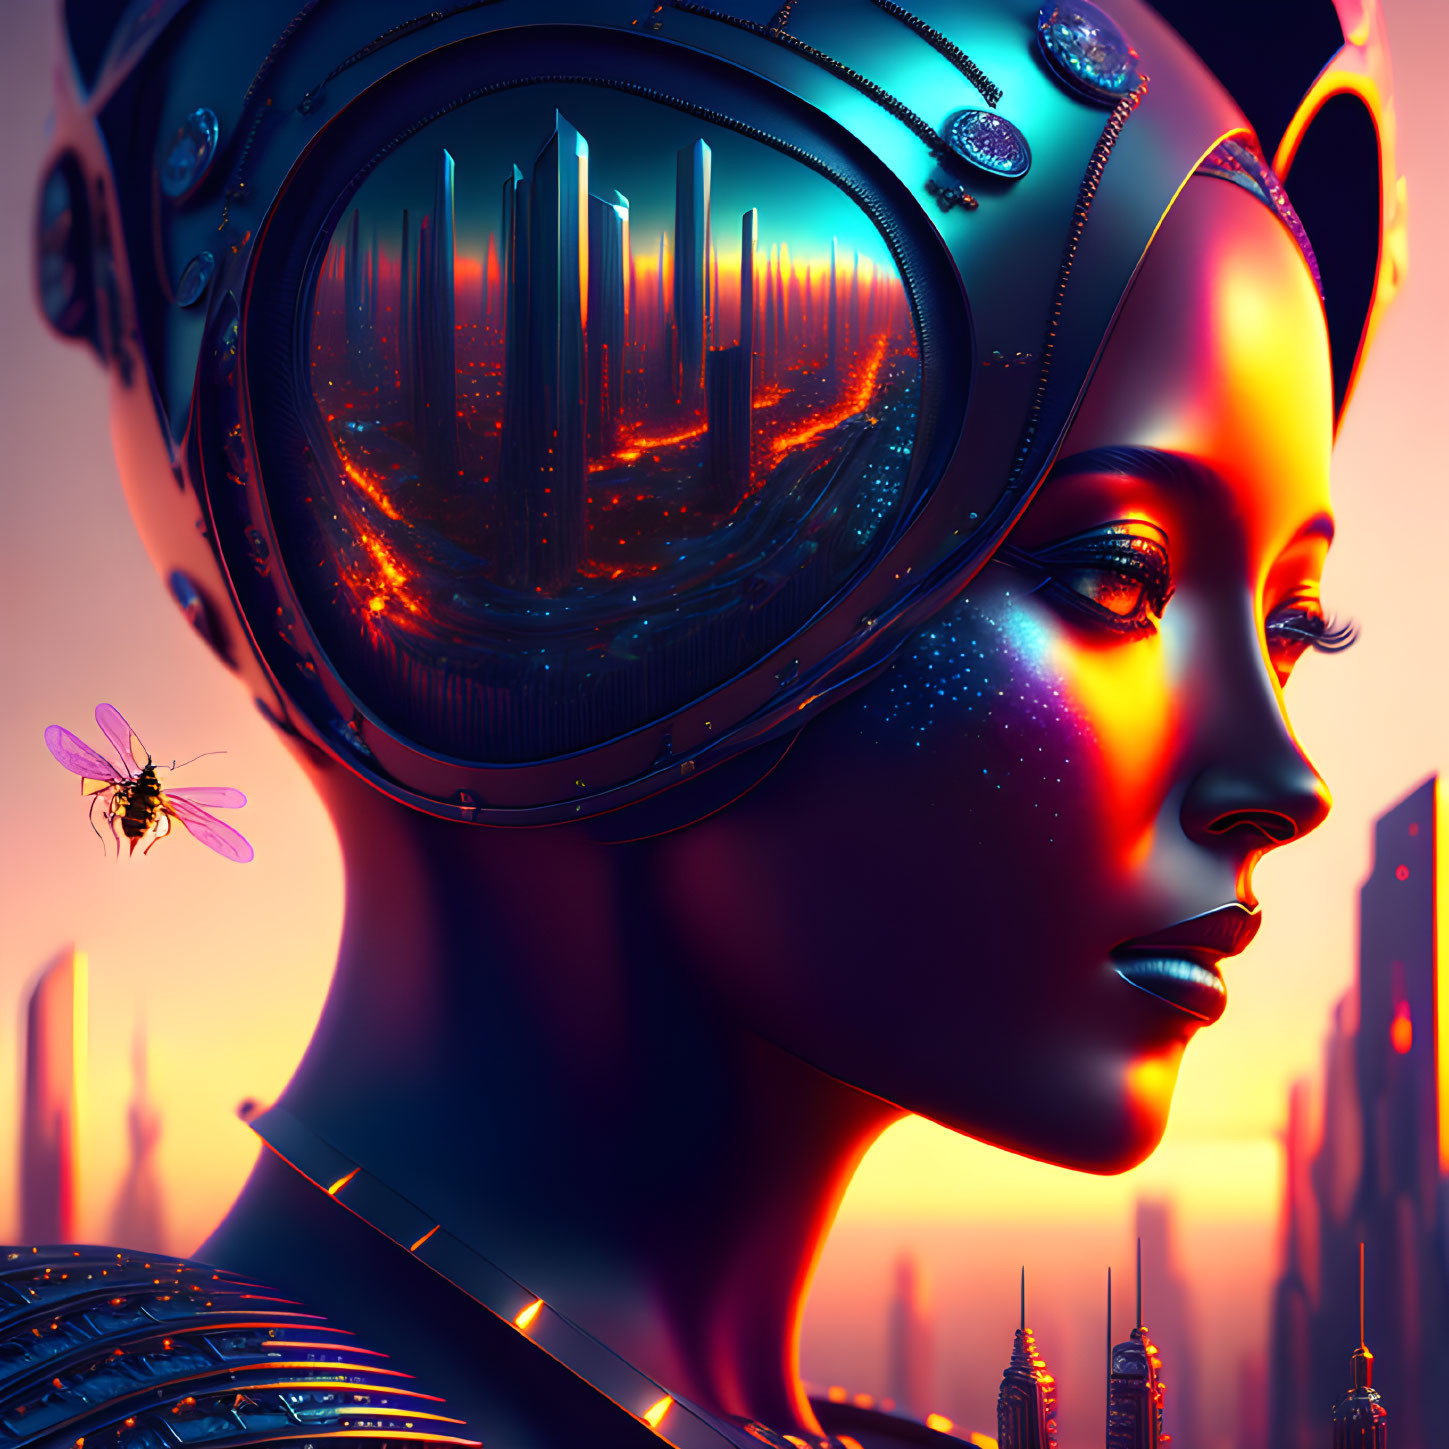 Futuristic female android with reflective helmet and cosmic skin patterns.